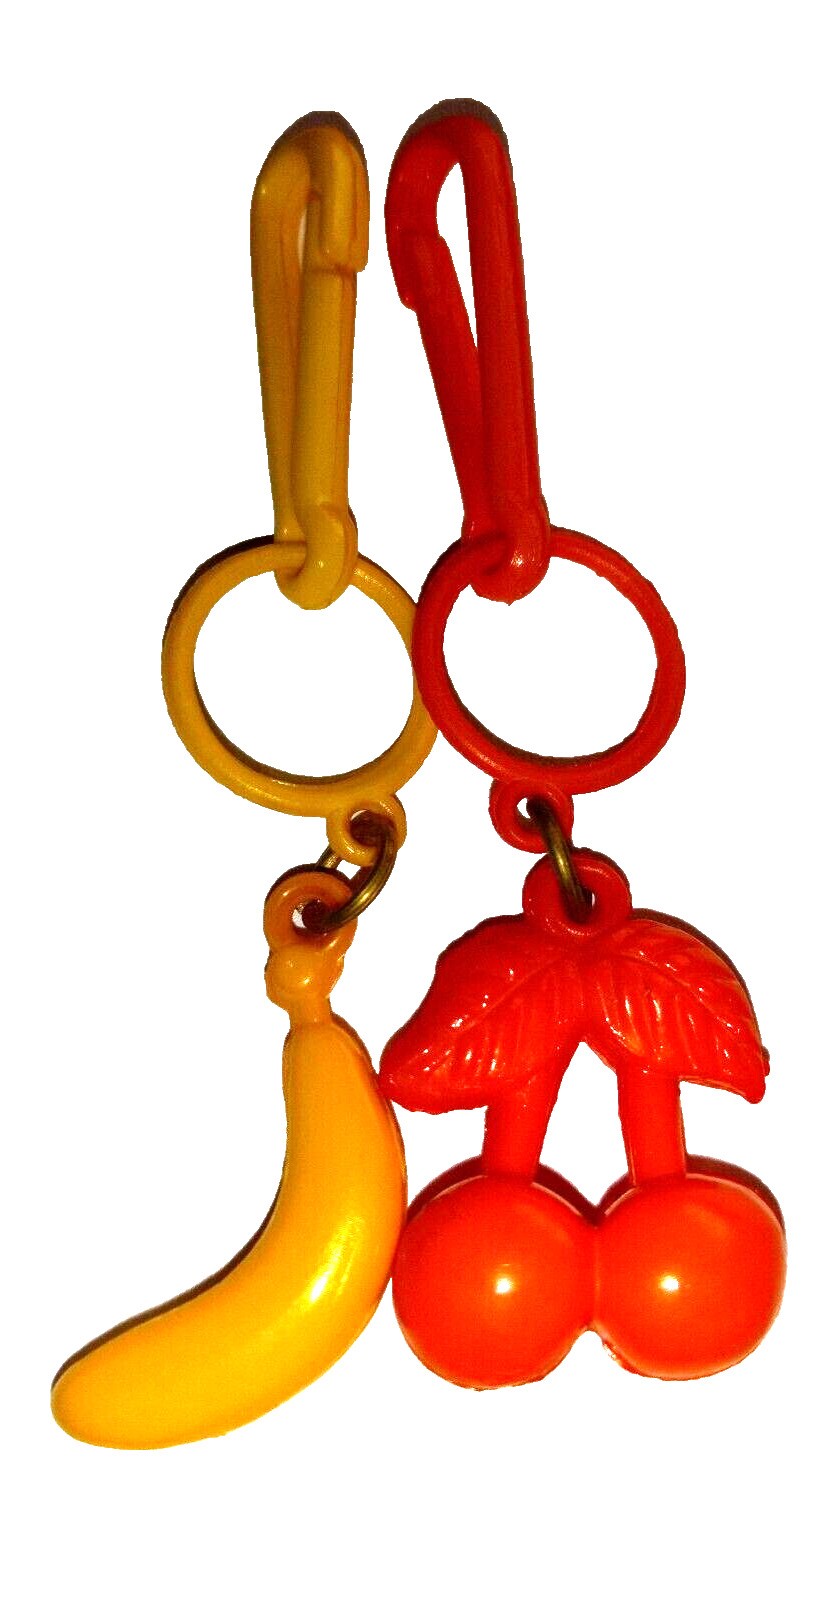 Charm 1980s Vintage Plastic Tropical Fruits Clip On Lot of 2 Cherries Banana